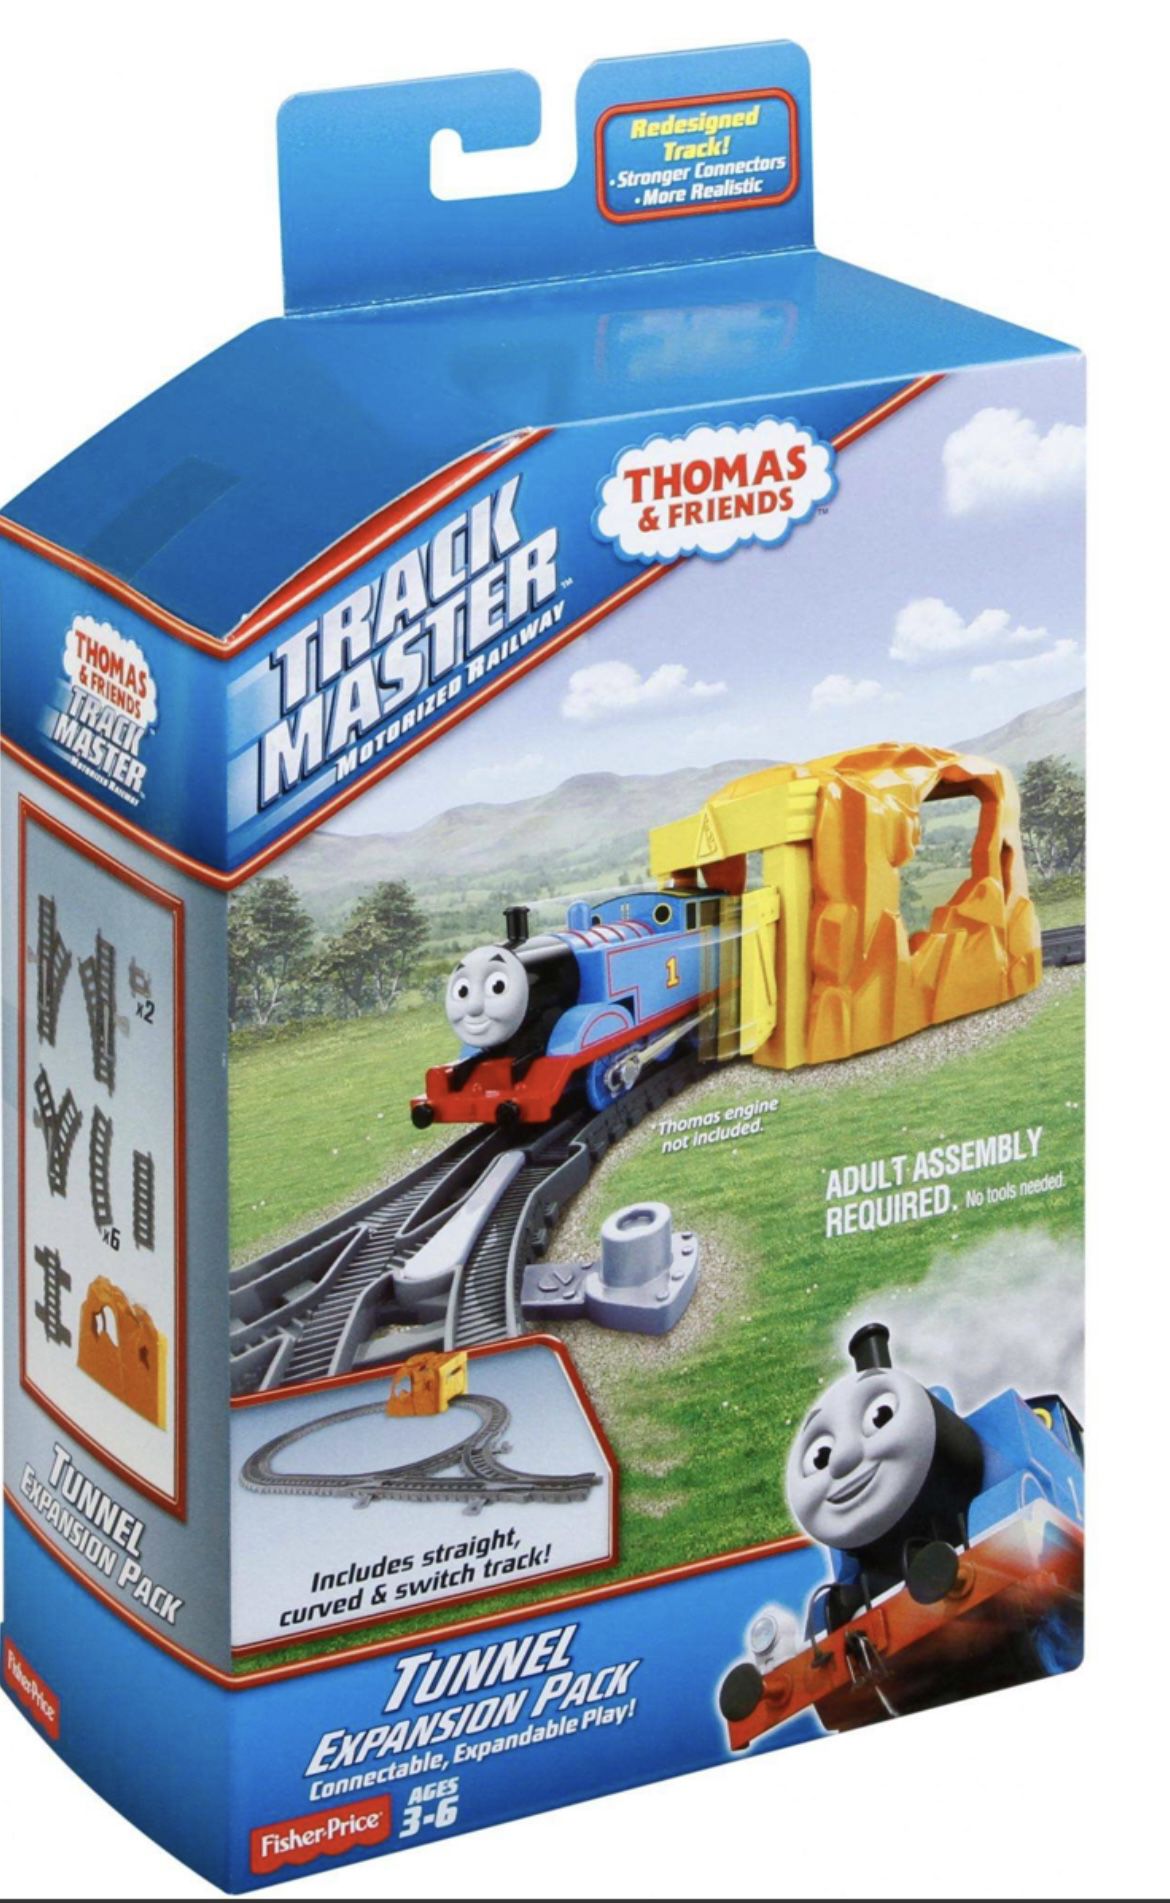 Thomas & Friends TrackMaster, Tunnel Expansion Pack